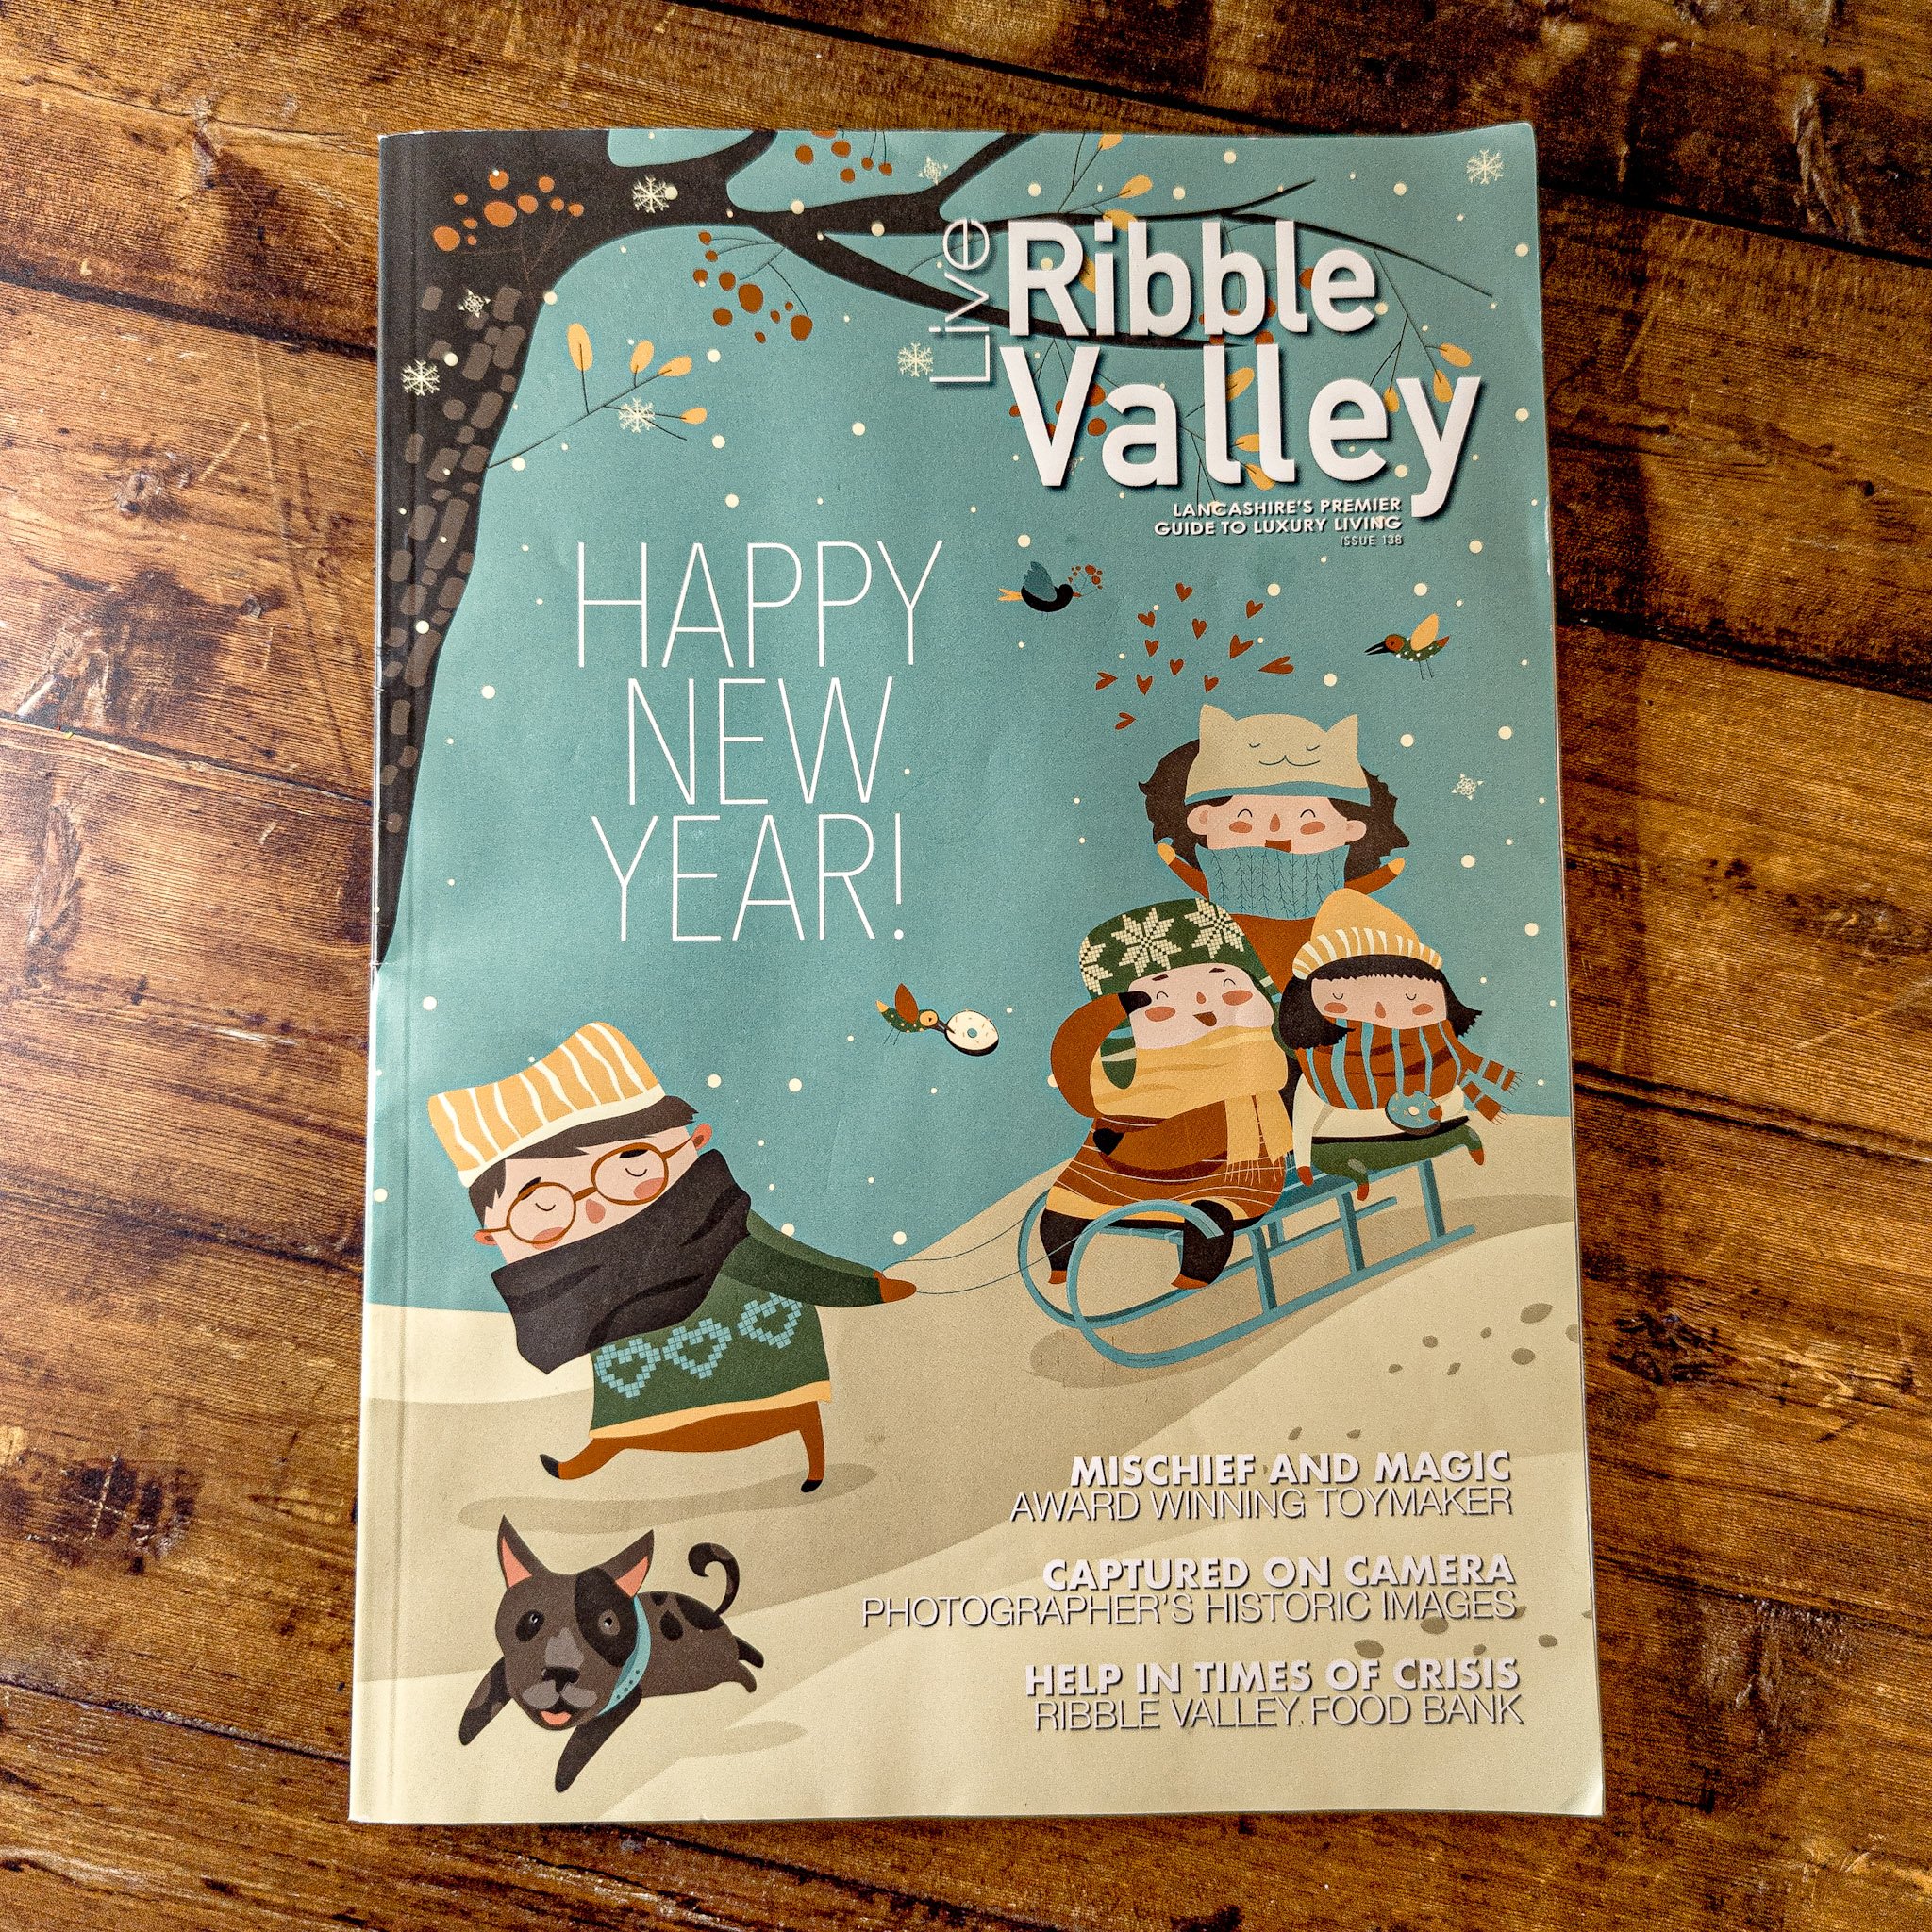 live-ribble-valley-cover.jpg